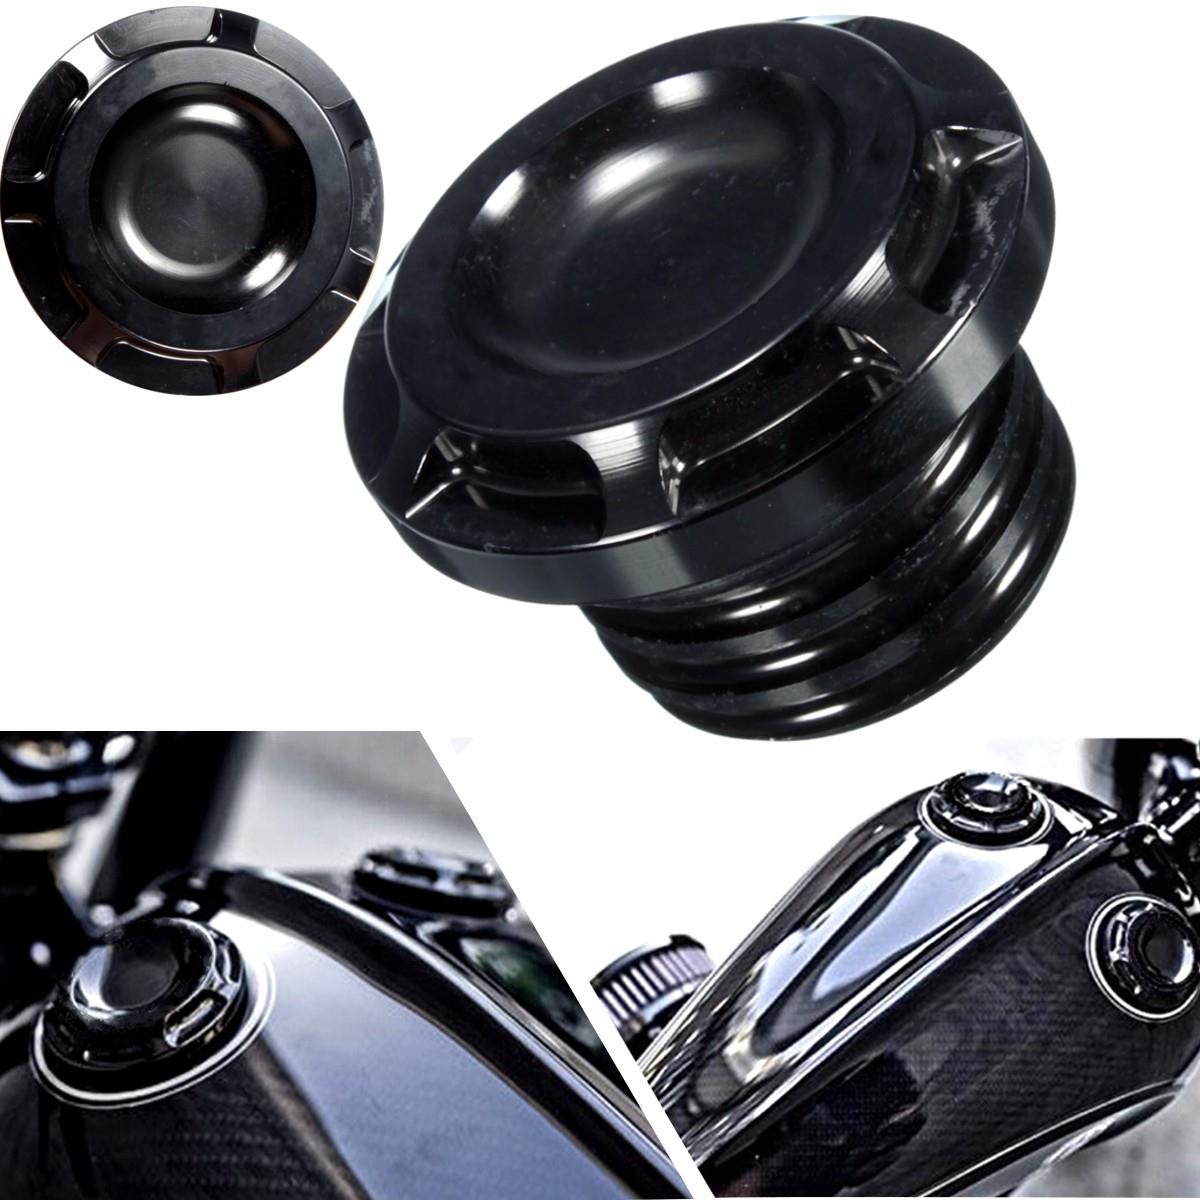 

CNC Aluminum Fuel Tank Cap Gas Motorcycle For Harley Sportster Dyna Touring Softail